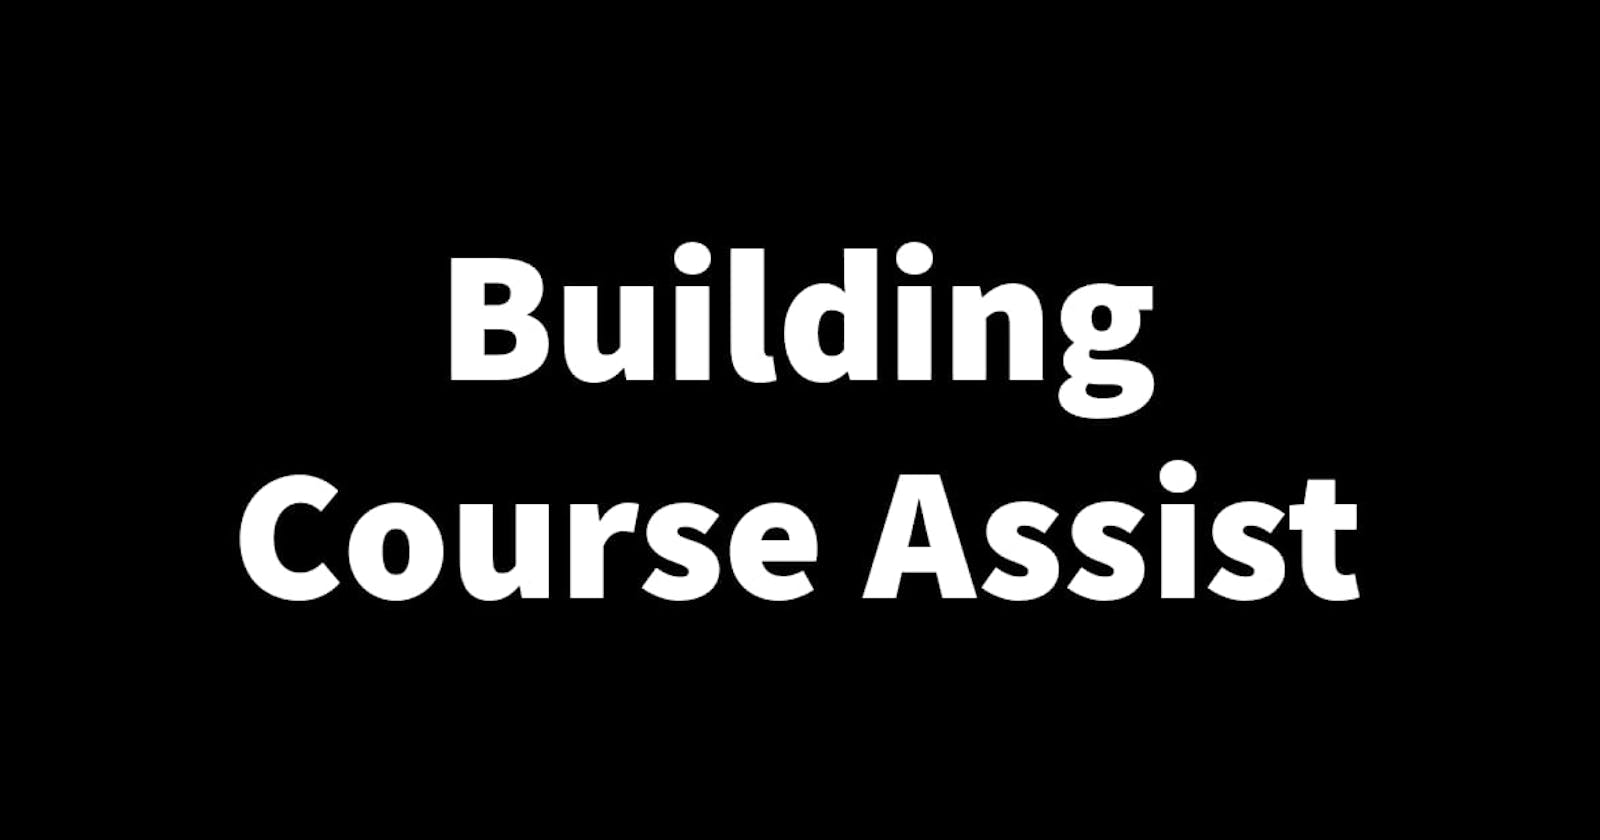 Building Course Assist Part 13: Updating the chat UI and adding terms of service and a help page.